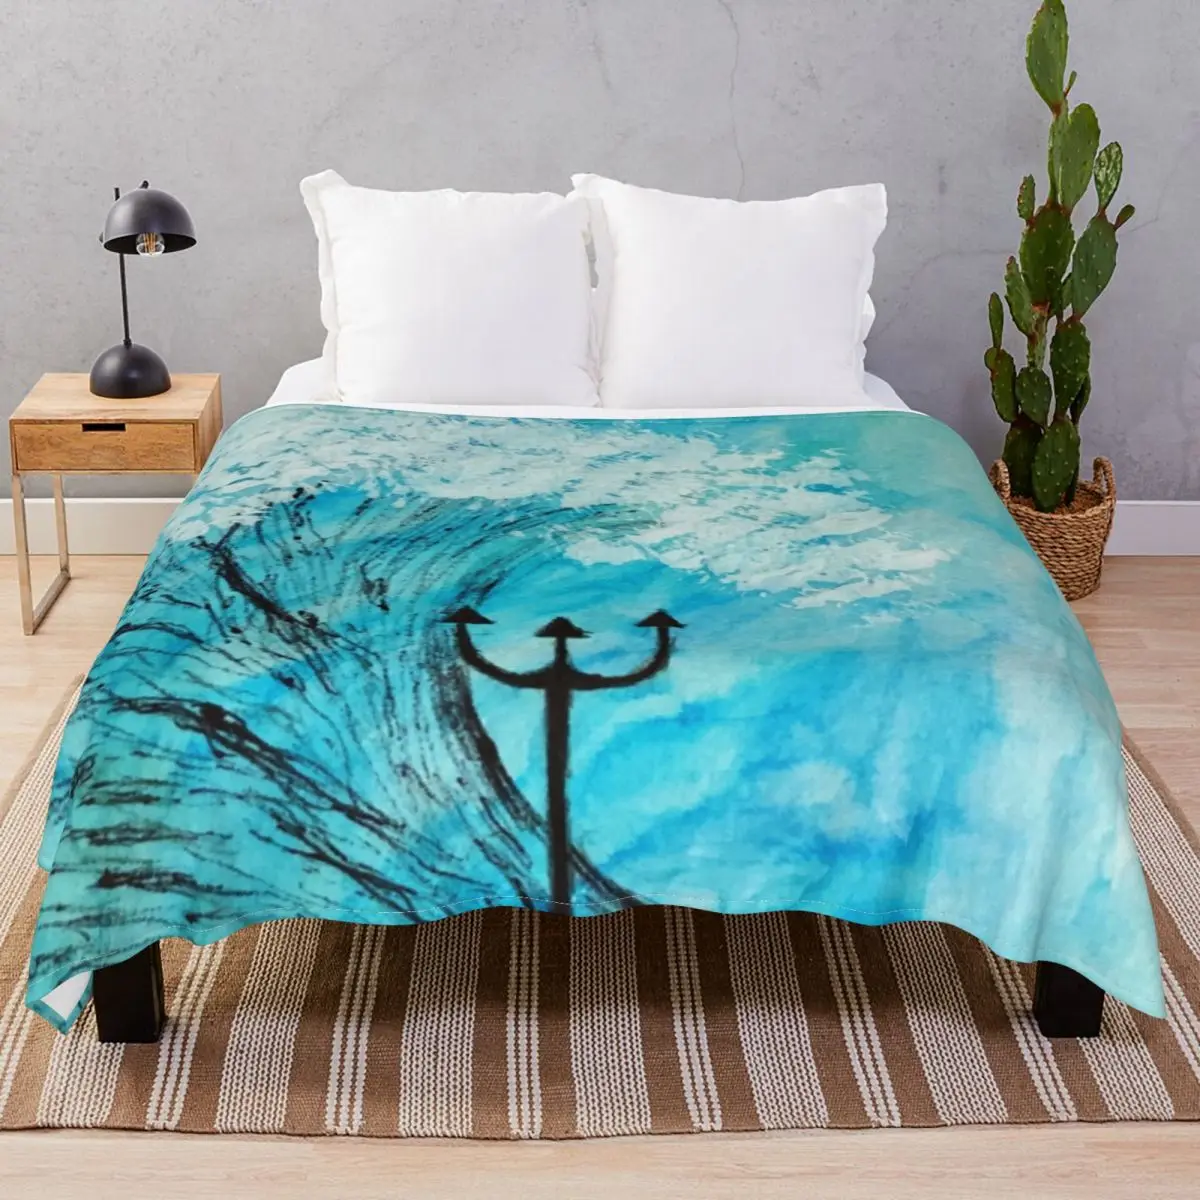 Percy Jackson Blanket Fleece Textile Decor Fluffy Throw Blankets for Bedding Home Couch Camp Cinema